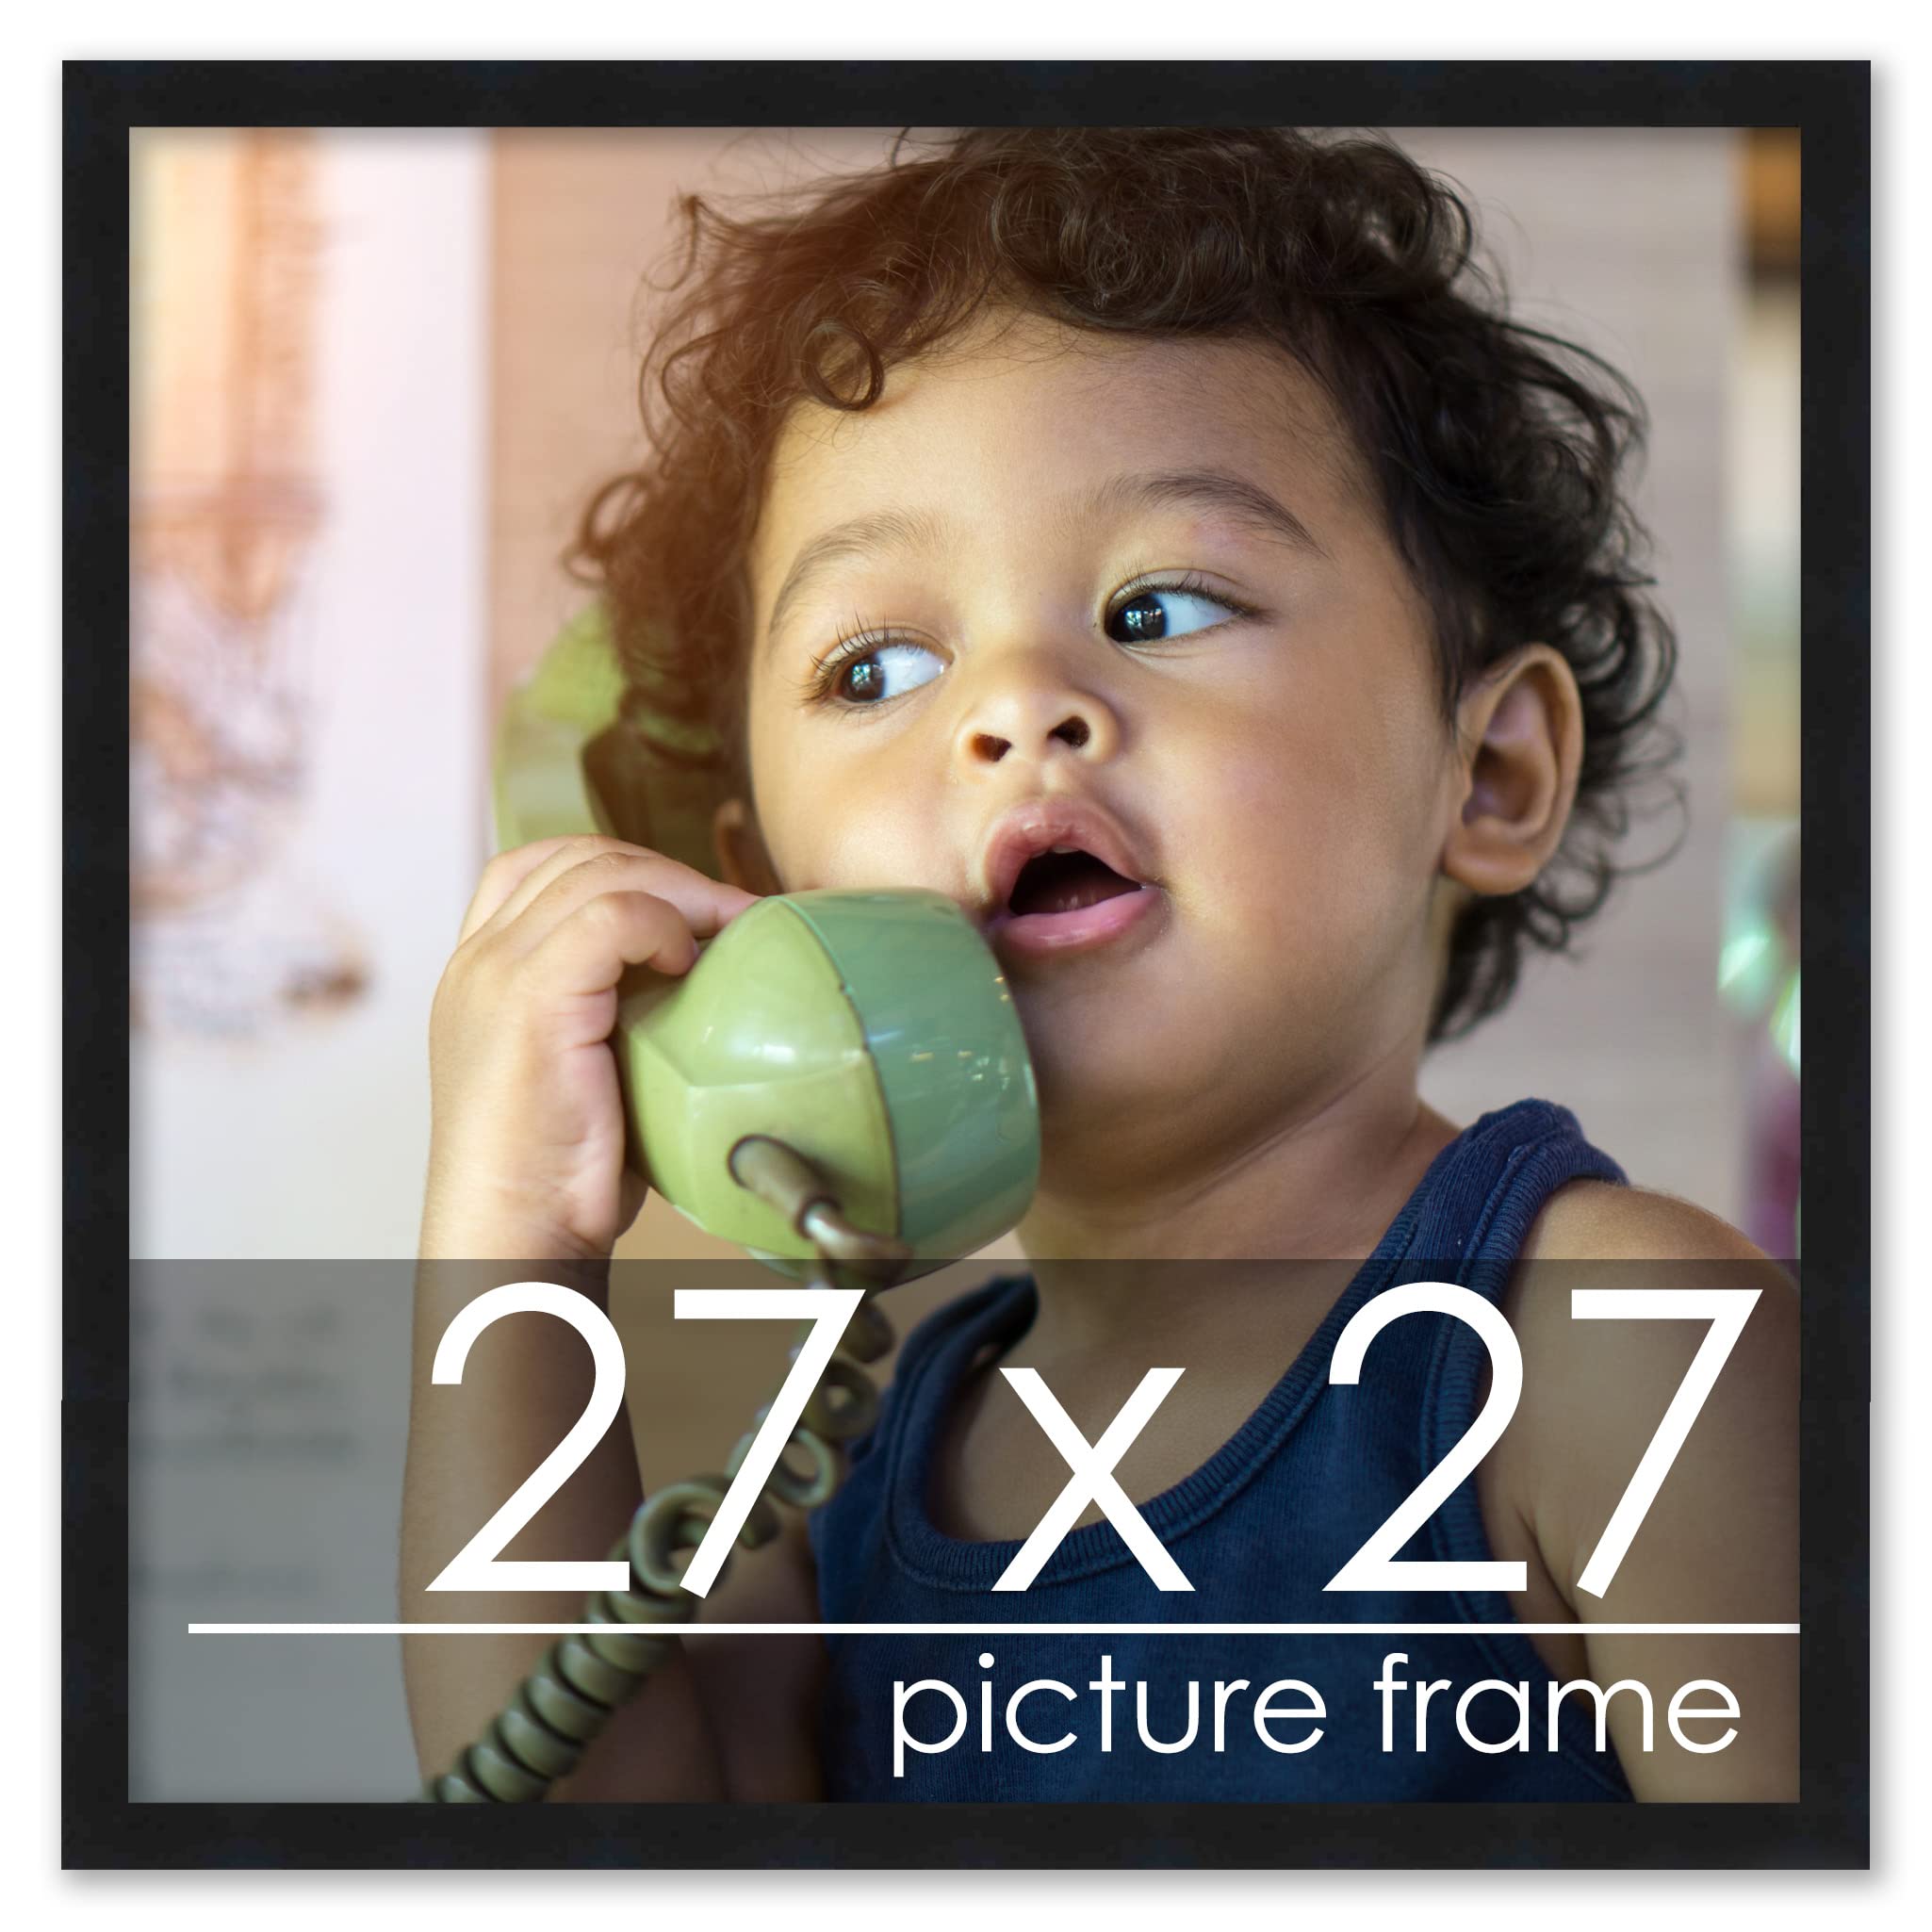 Poster Palooza 27x27 Contemporary Black Wood Picture Square Frame - Picture Frame Includes UV Acrylic, Foam Board Backing, & Hanging Hardware!